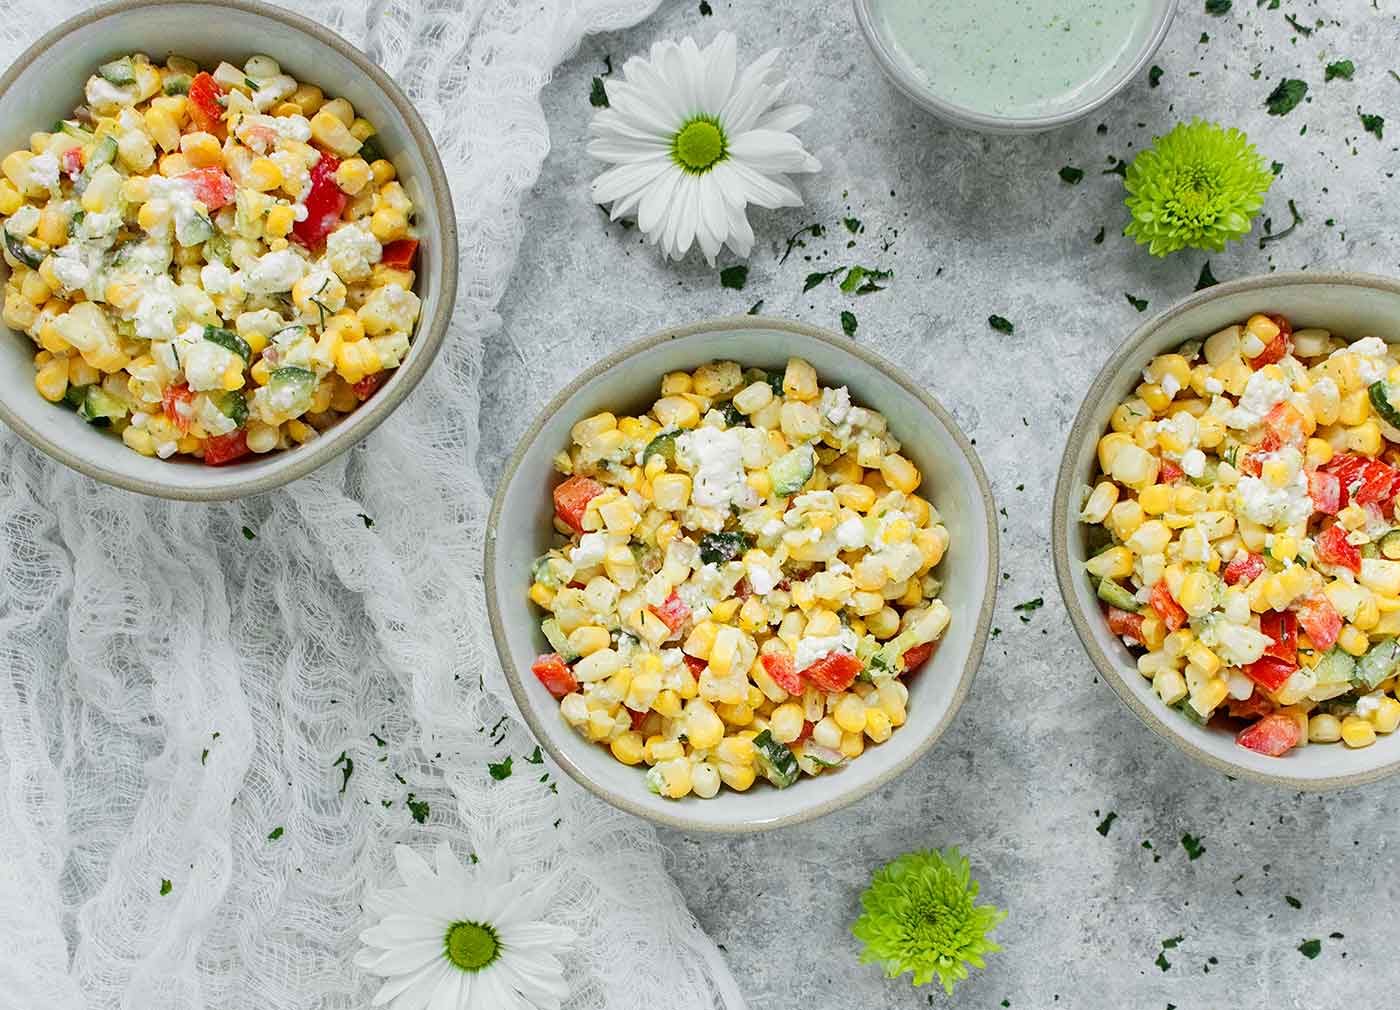 Three bowls of Sweet Corn Salad with Creamy Dill Dressing on the side